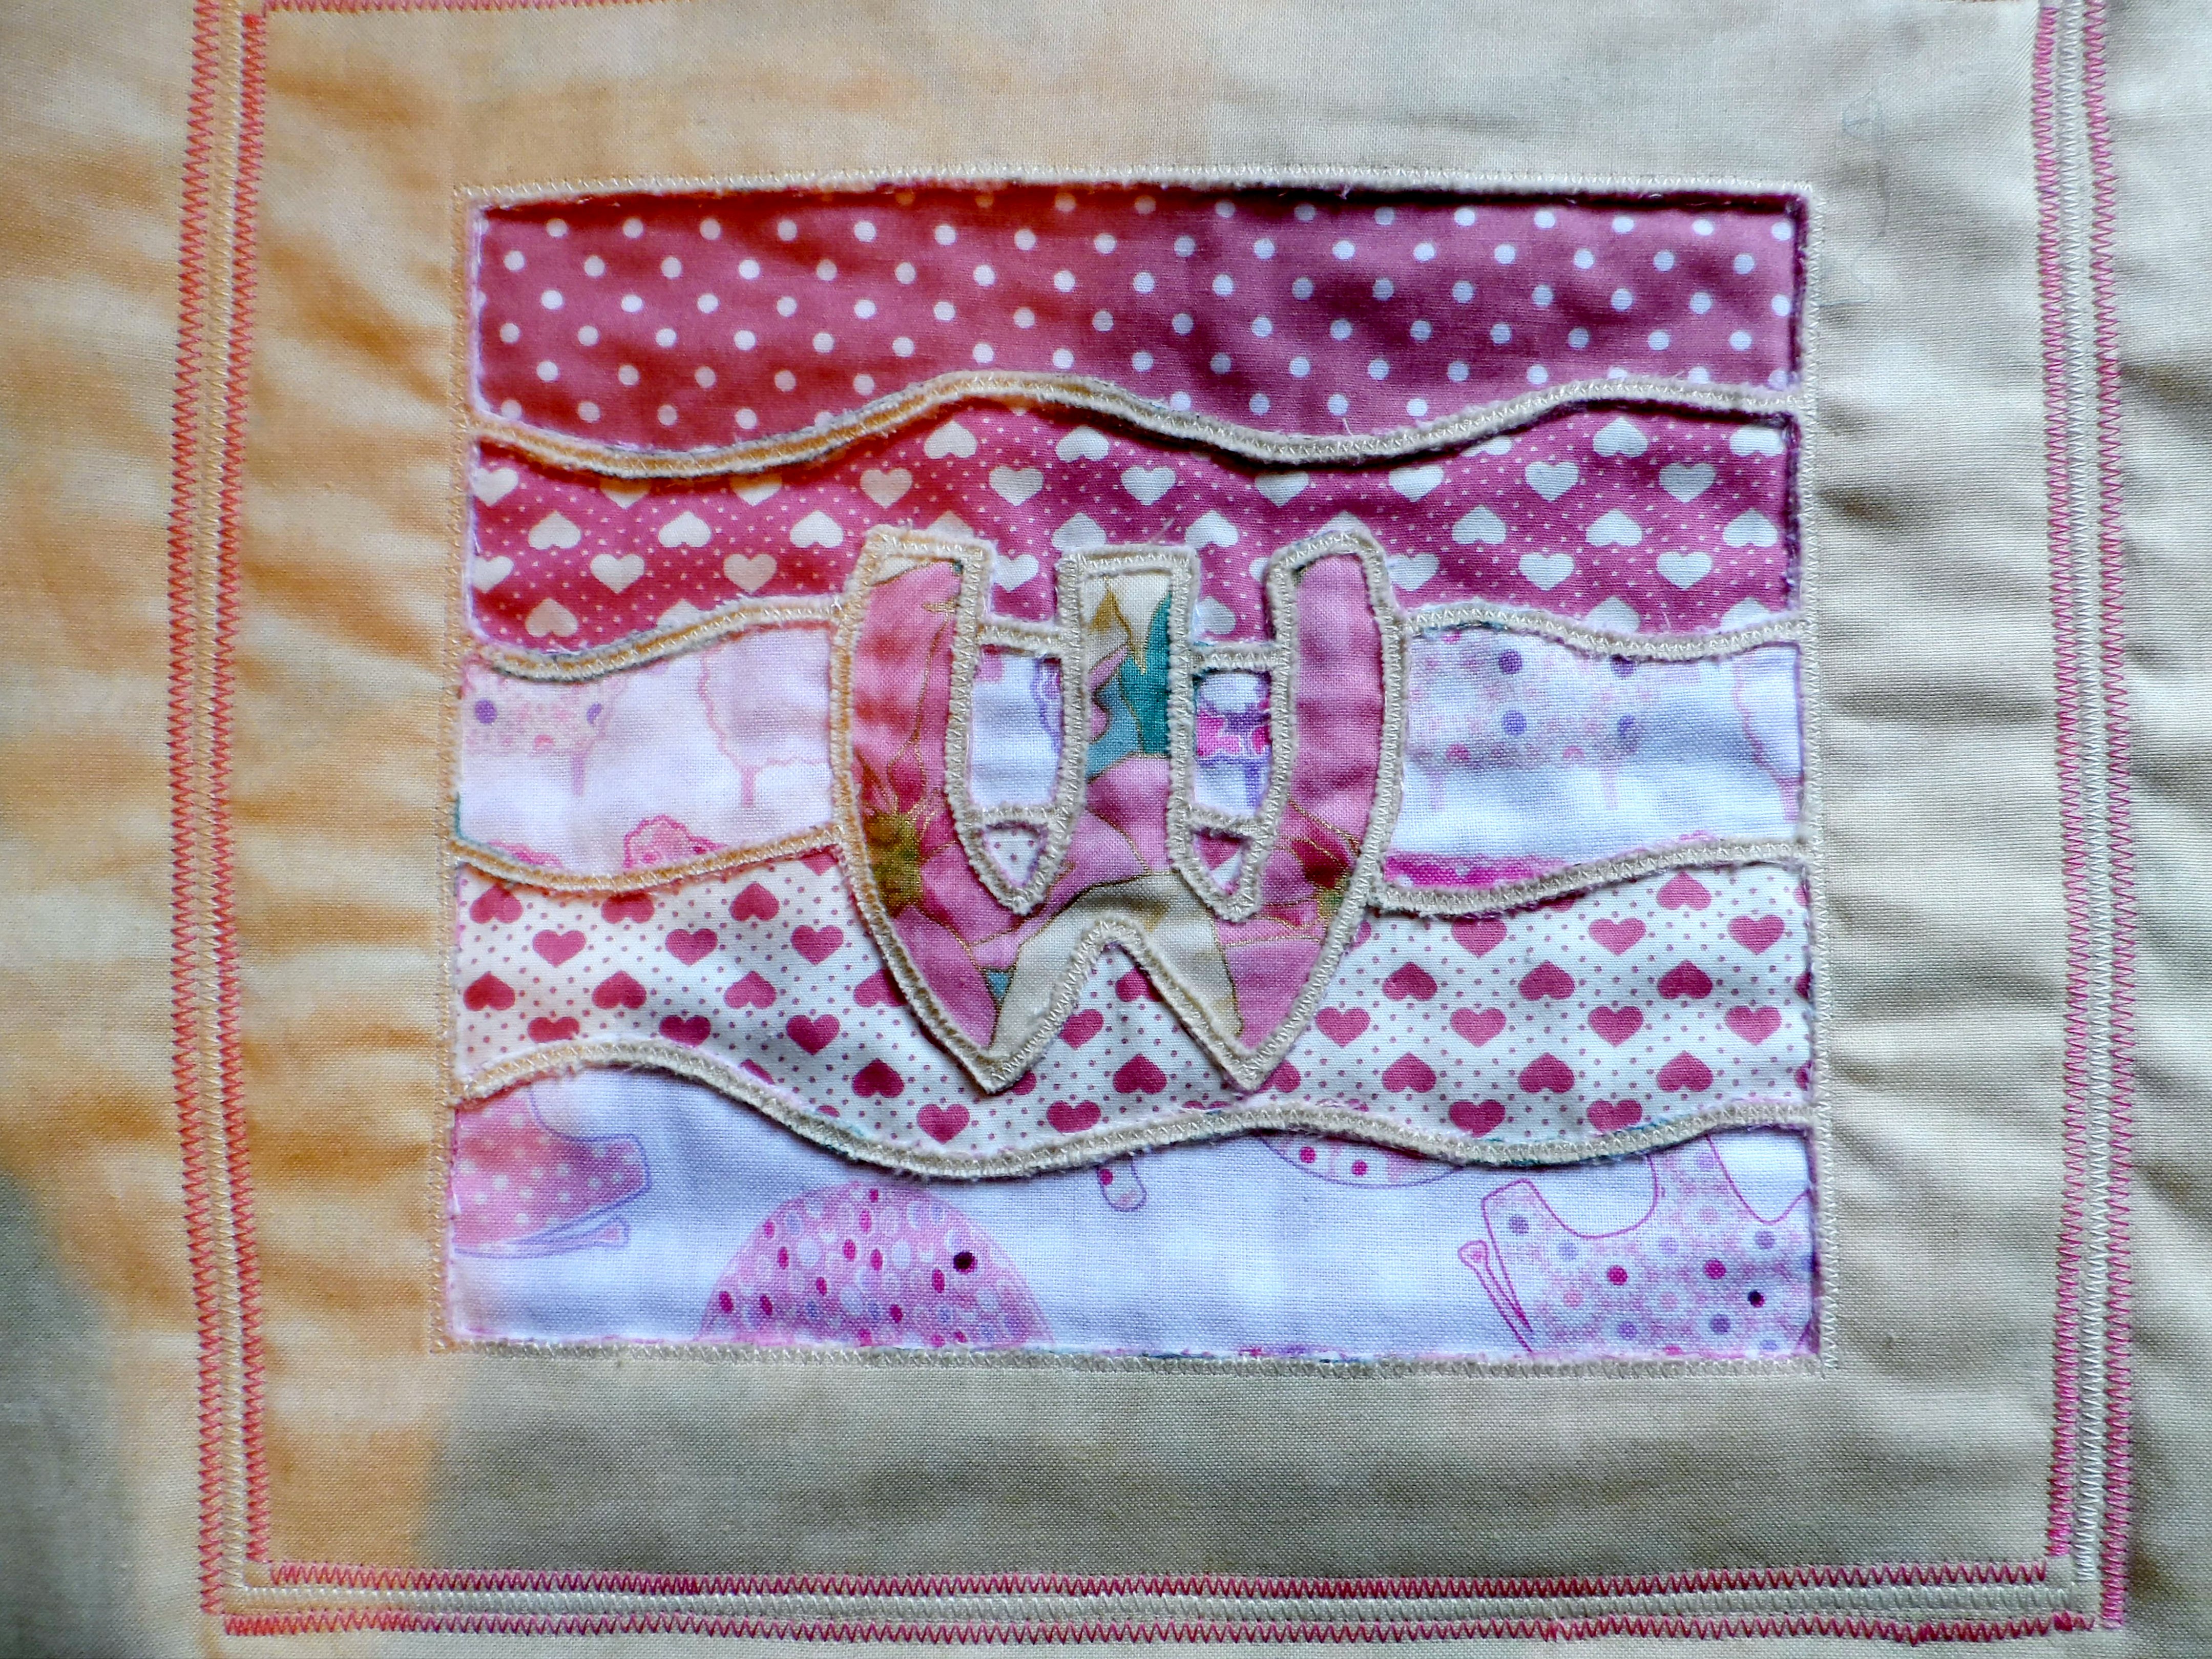 Wendy's reverse applique picture made at a 2013 Workshop